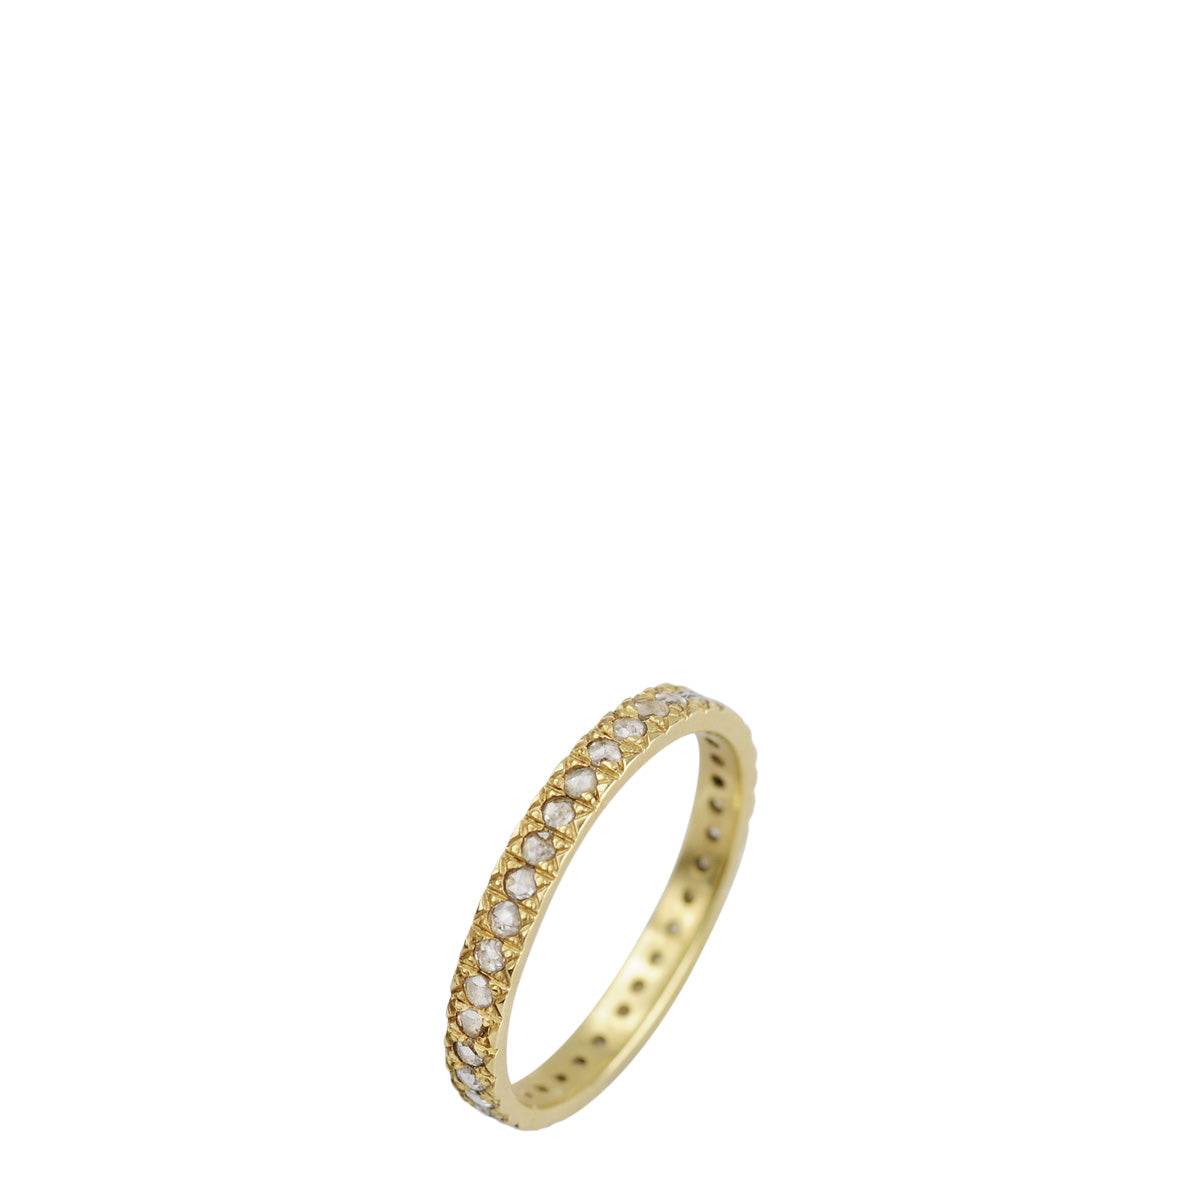 18K Gold 2.5mm Band with 1.5mm Rose Cut Diamonds